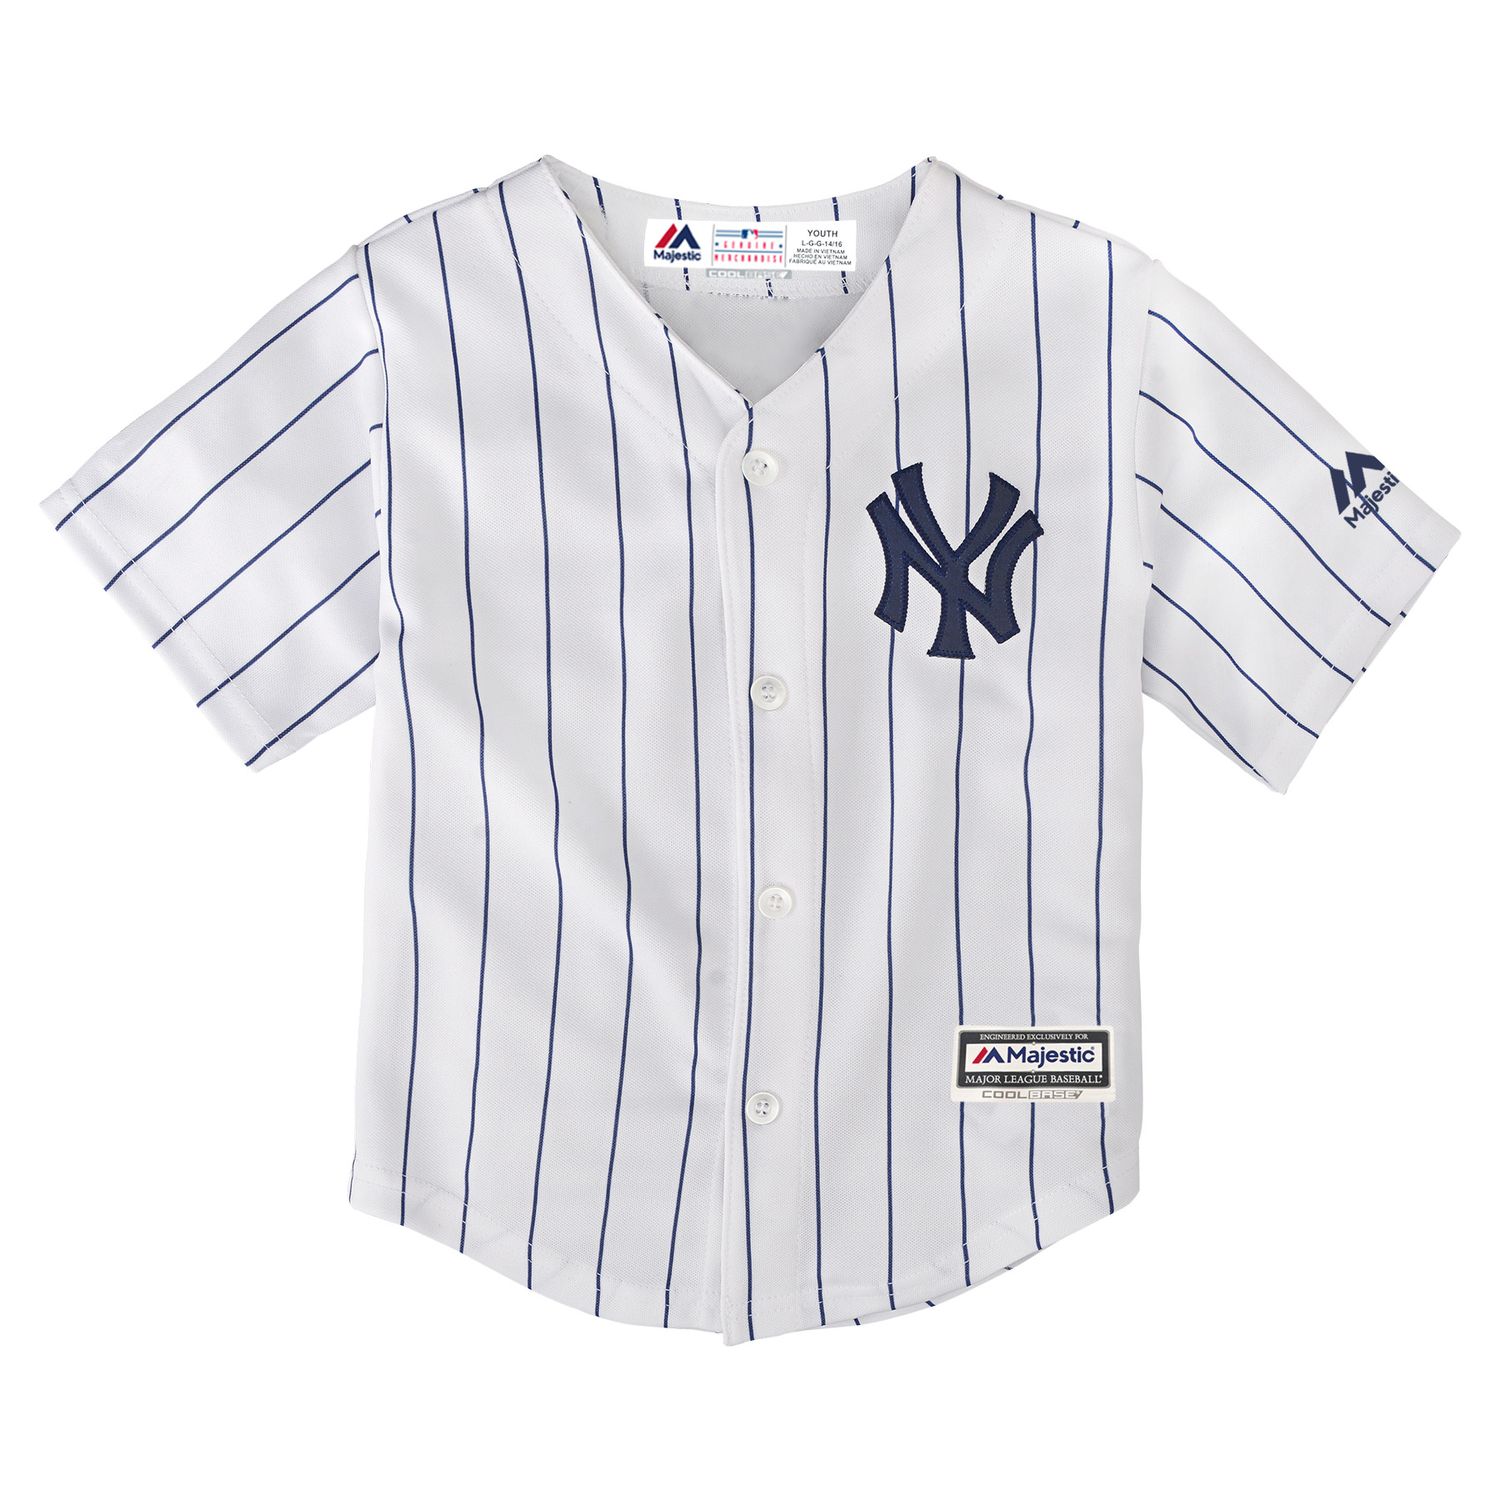 where can i buy a new york yankees jersey